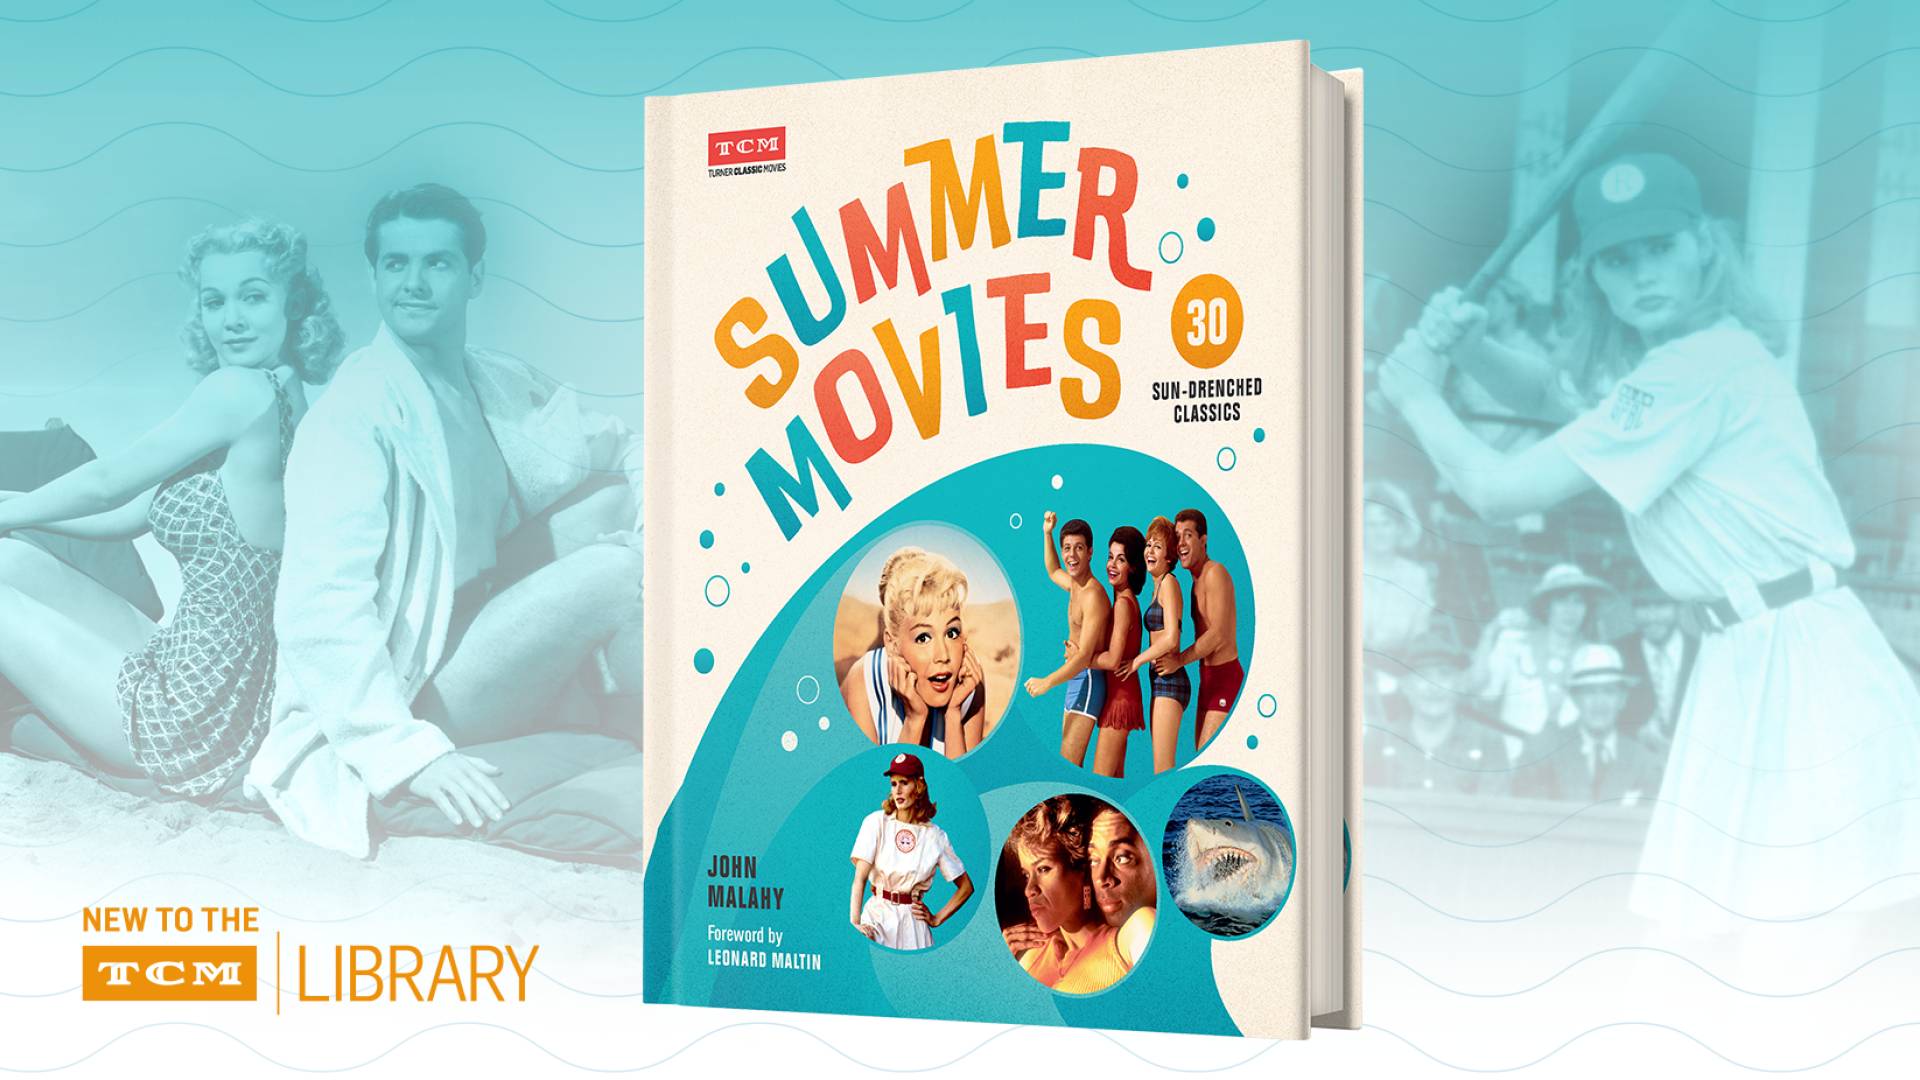 Just Released The Newest Book In The TCM Library Summer Movies 30